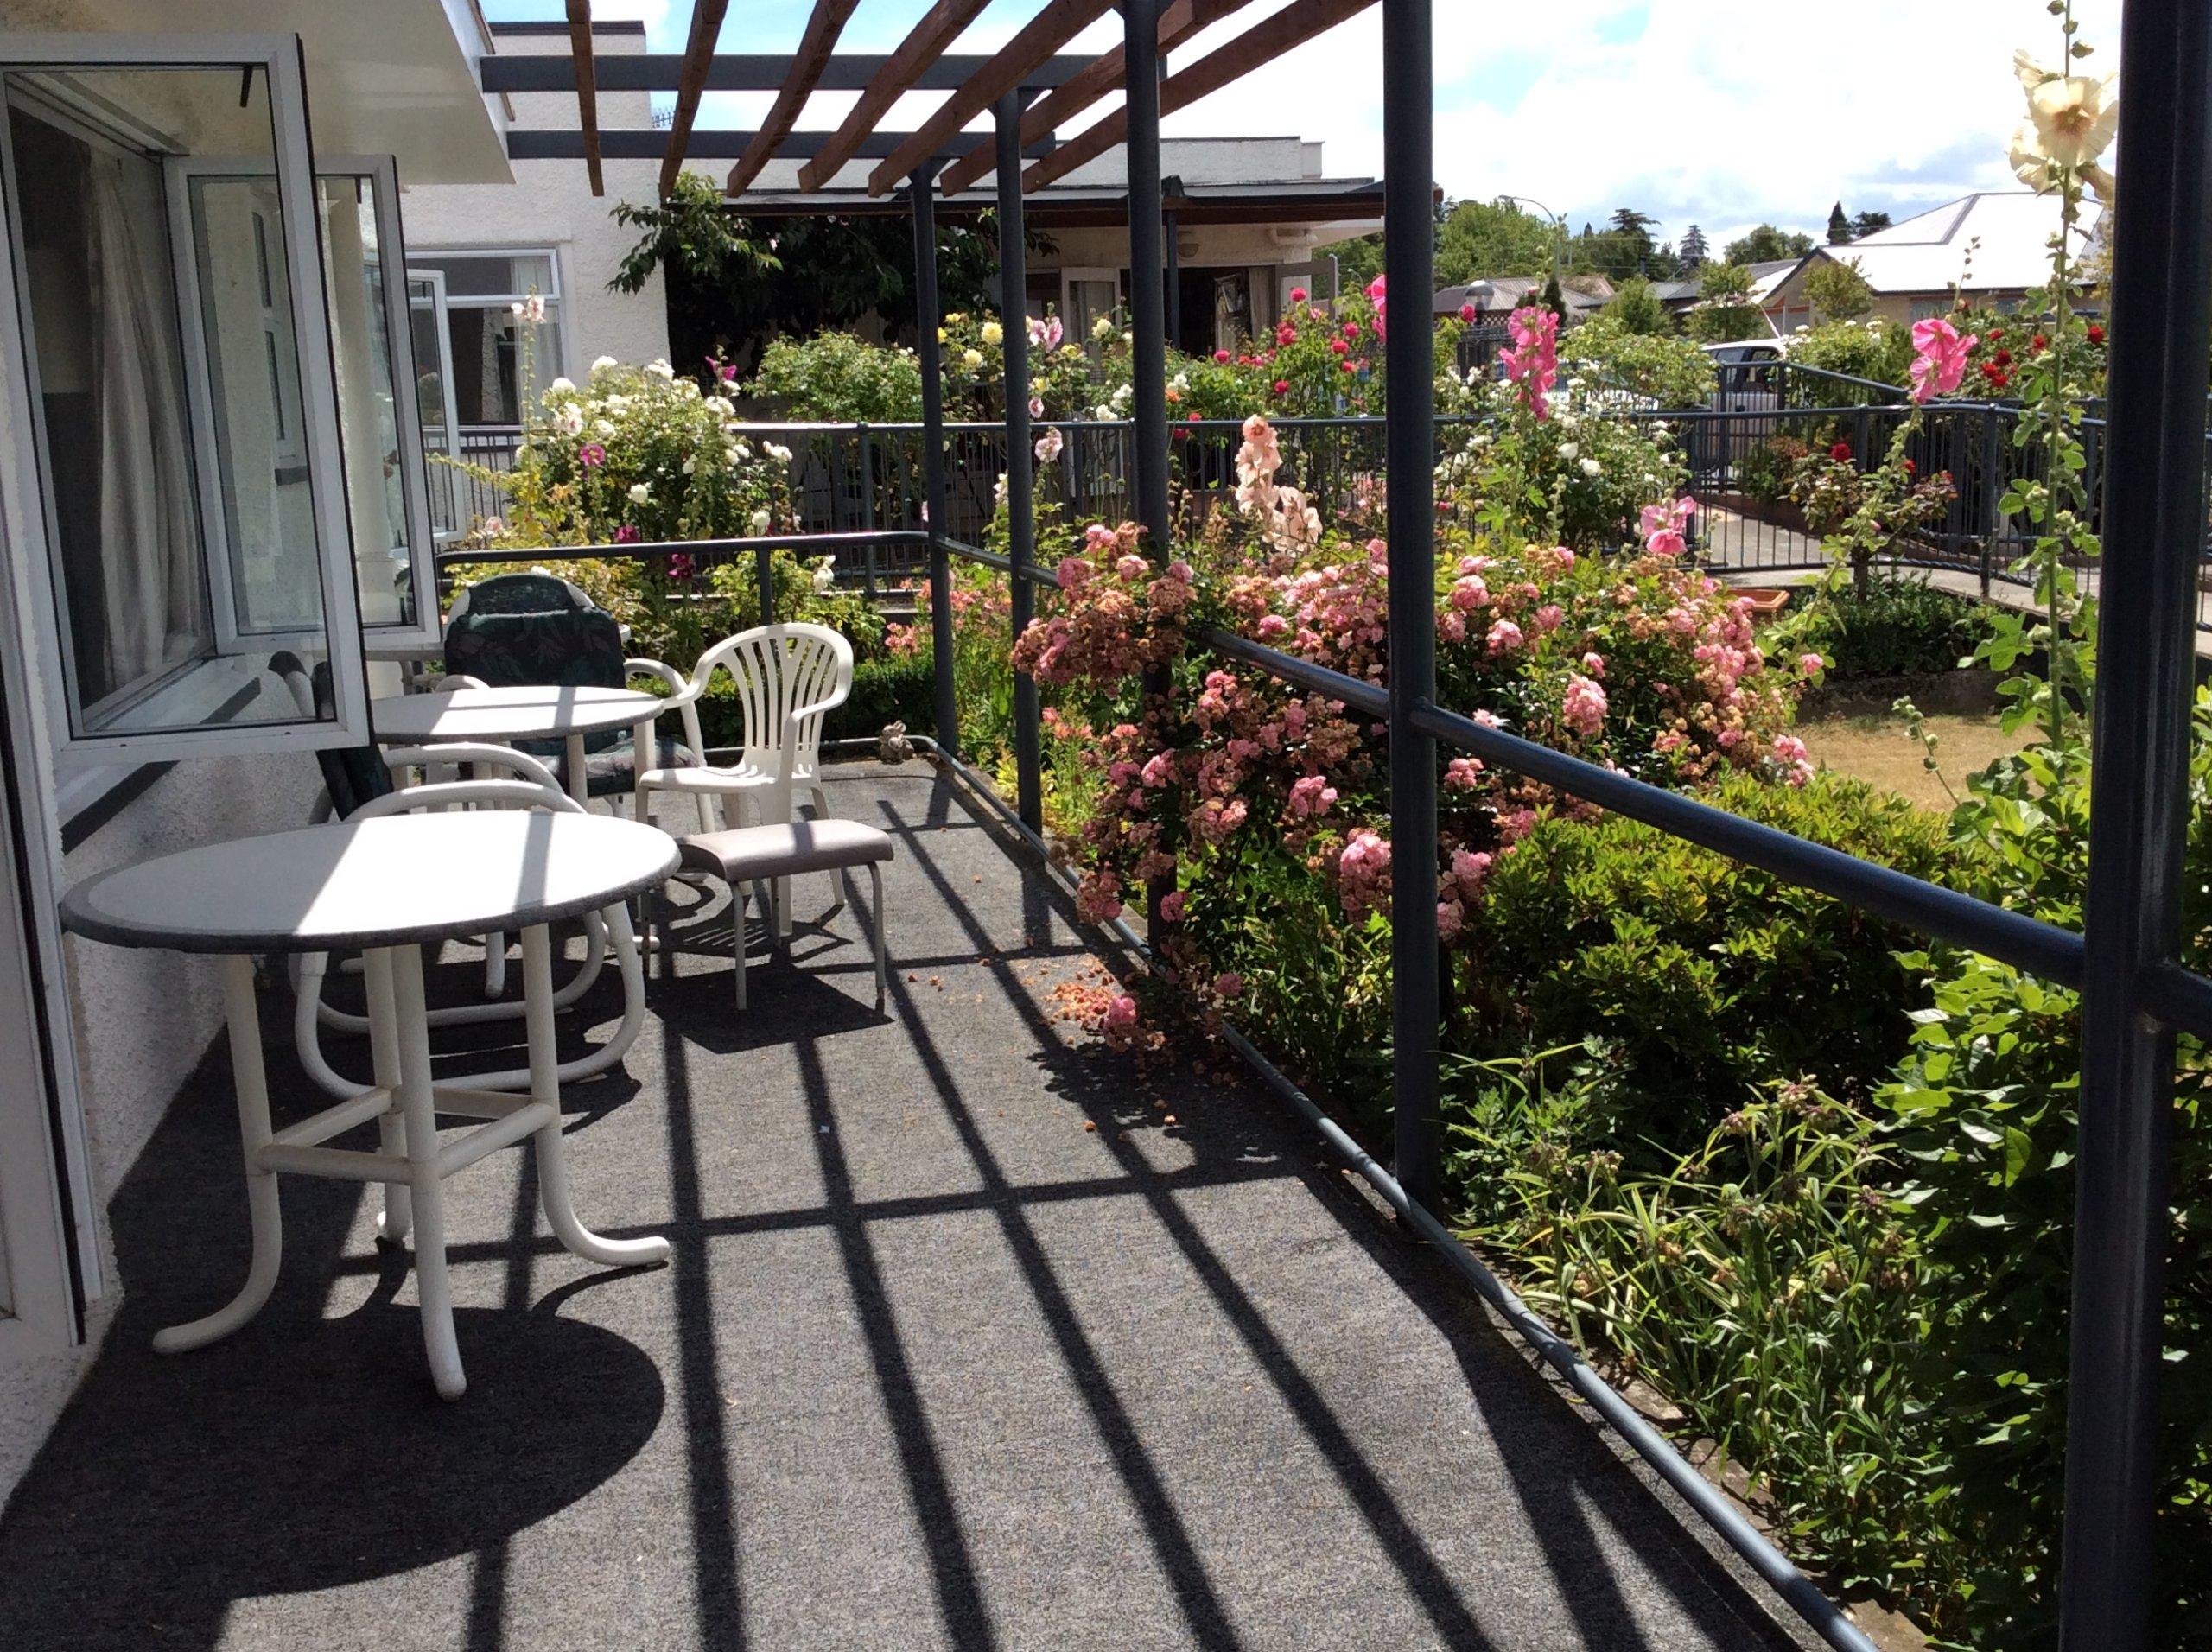 Woburn aged care centre patio with flowers